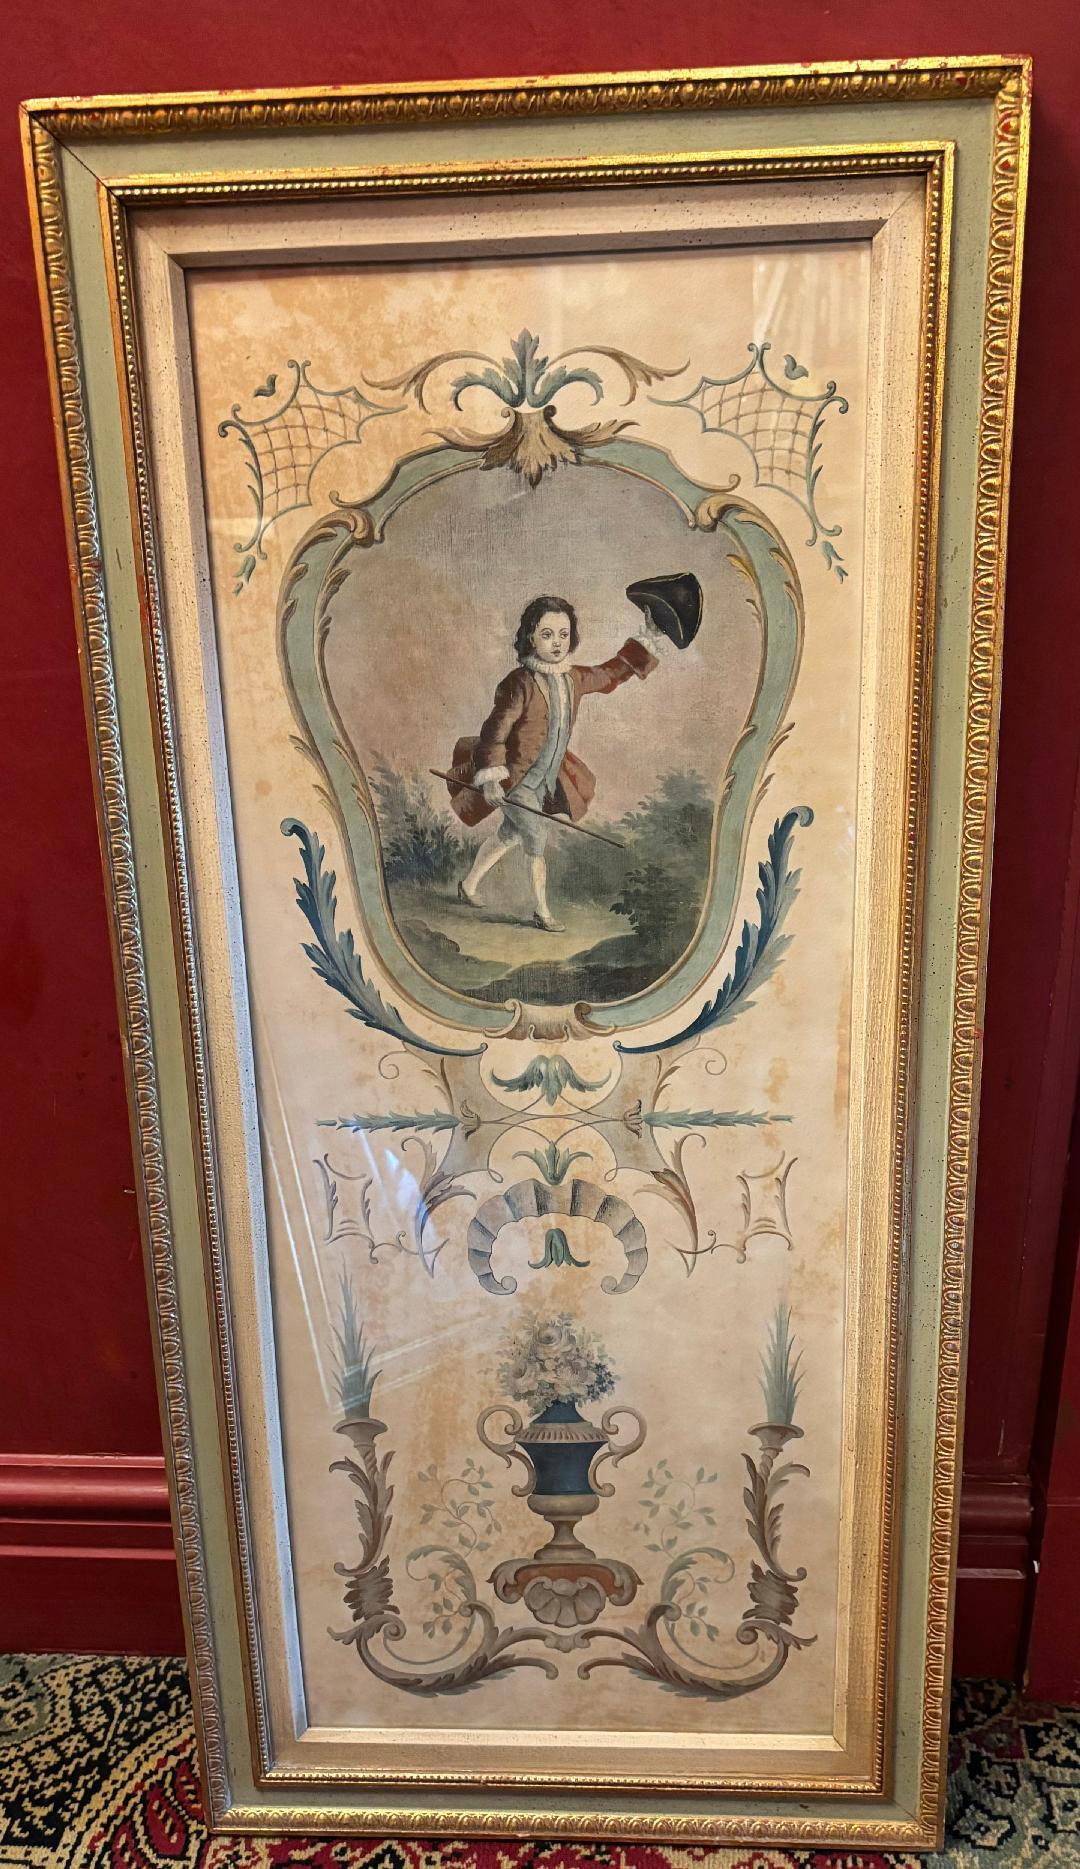 Pair of Large Framed French Vintage Prints After Drouais. Mademoiselle De Charlois and Duc D’Orleans. This is a pair of offset lithographs based on the original. These were probably printed in the 1940s. Perfect for any Francophile. 